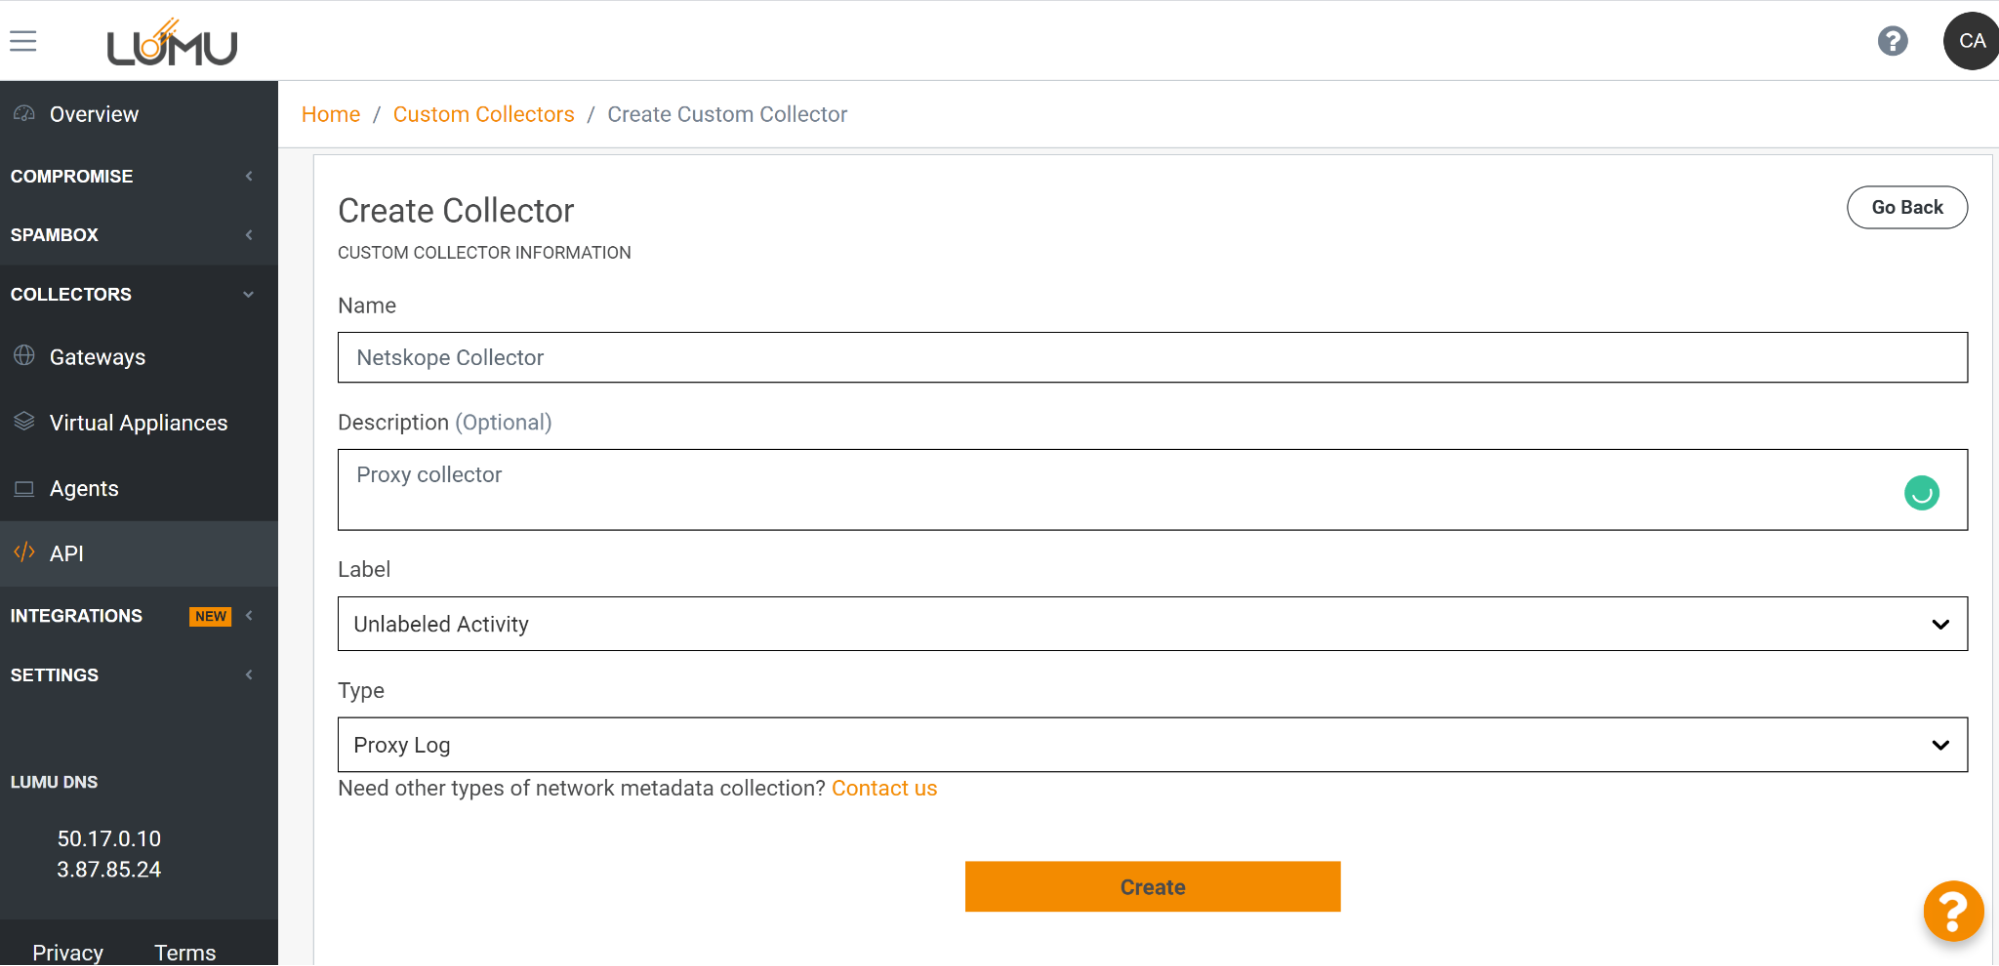 add a Custom Collector and select Proxy Log as the collector type